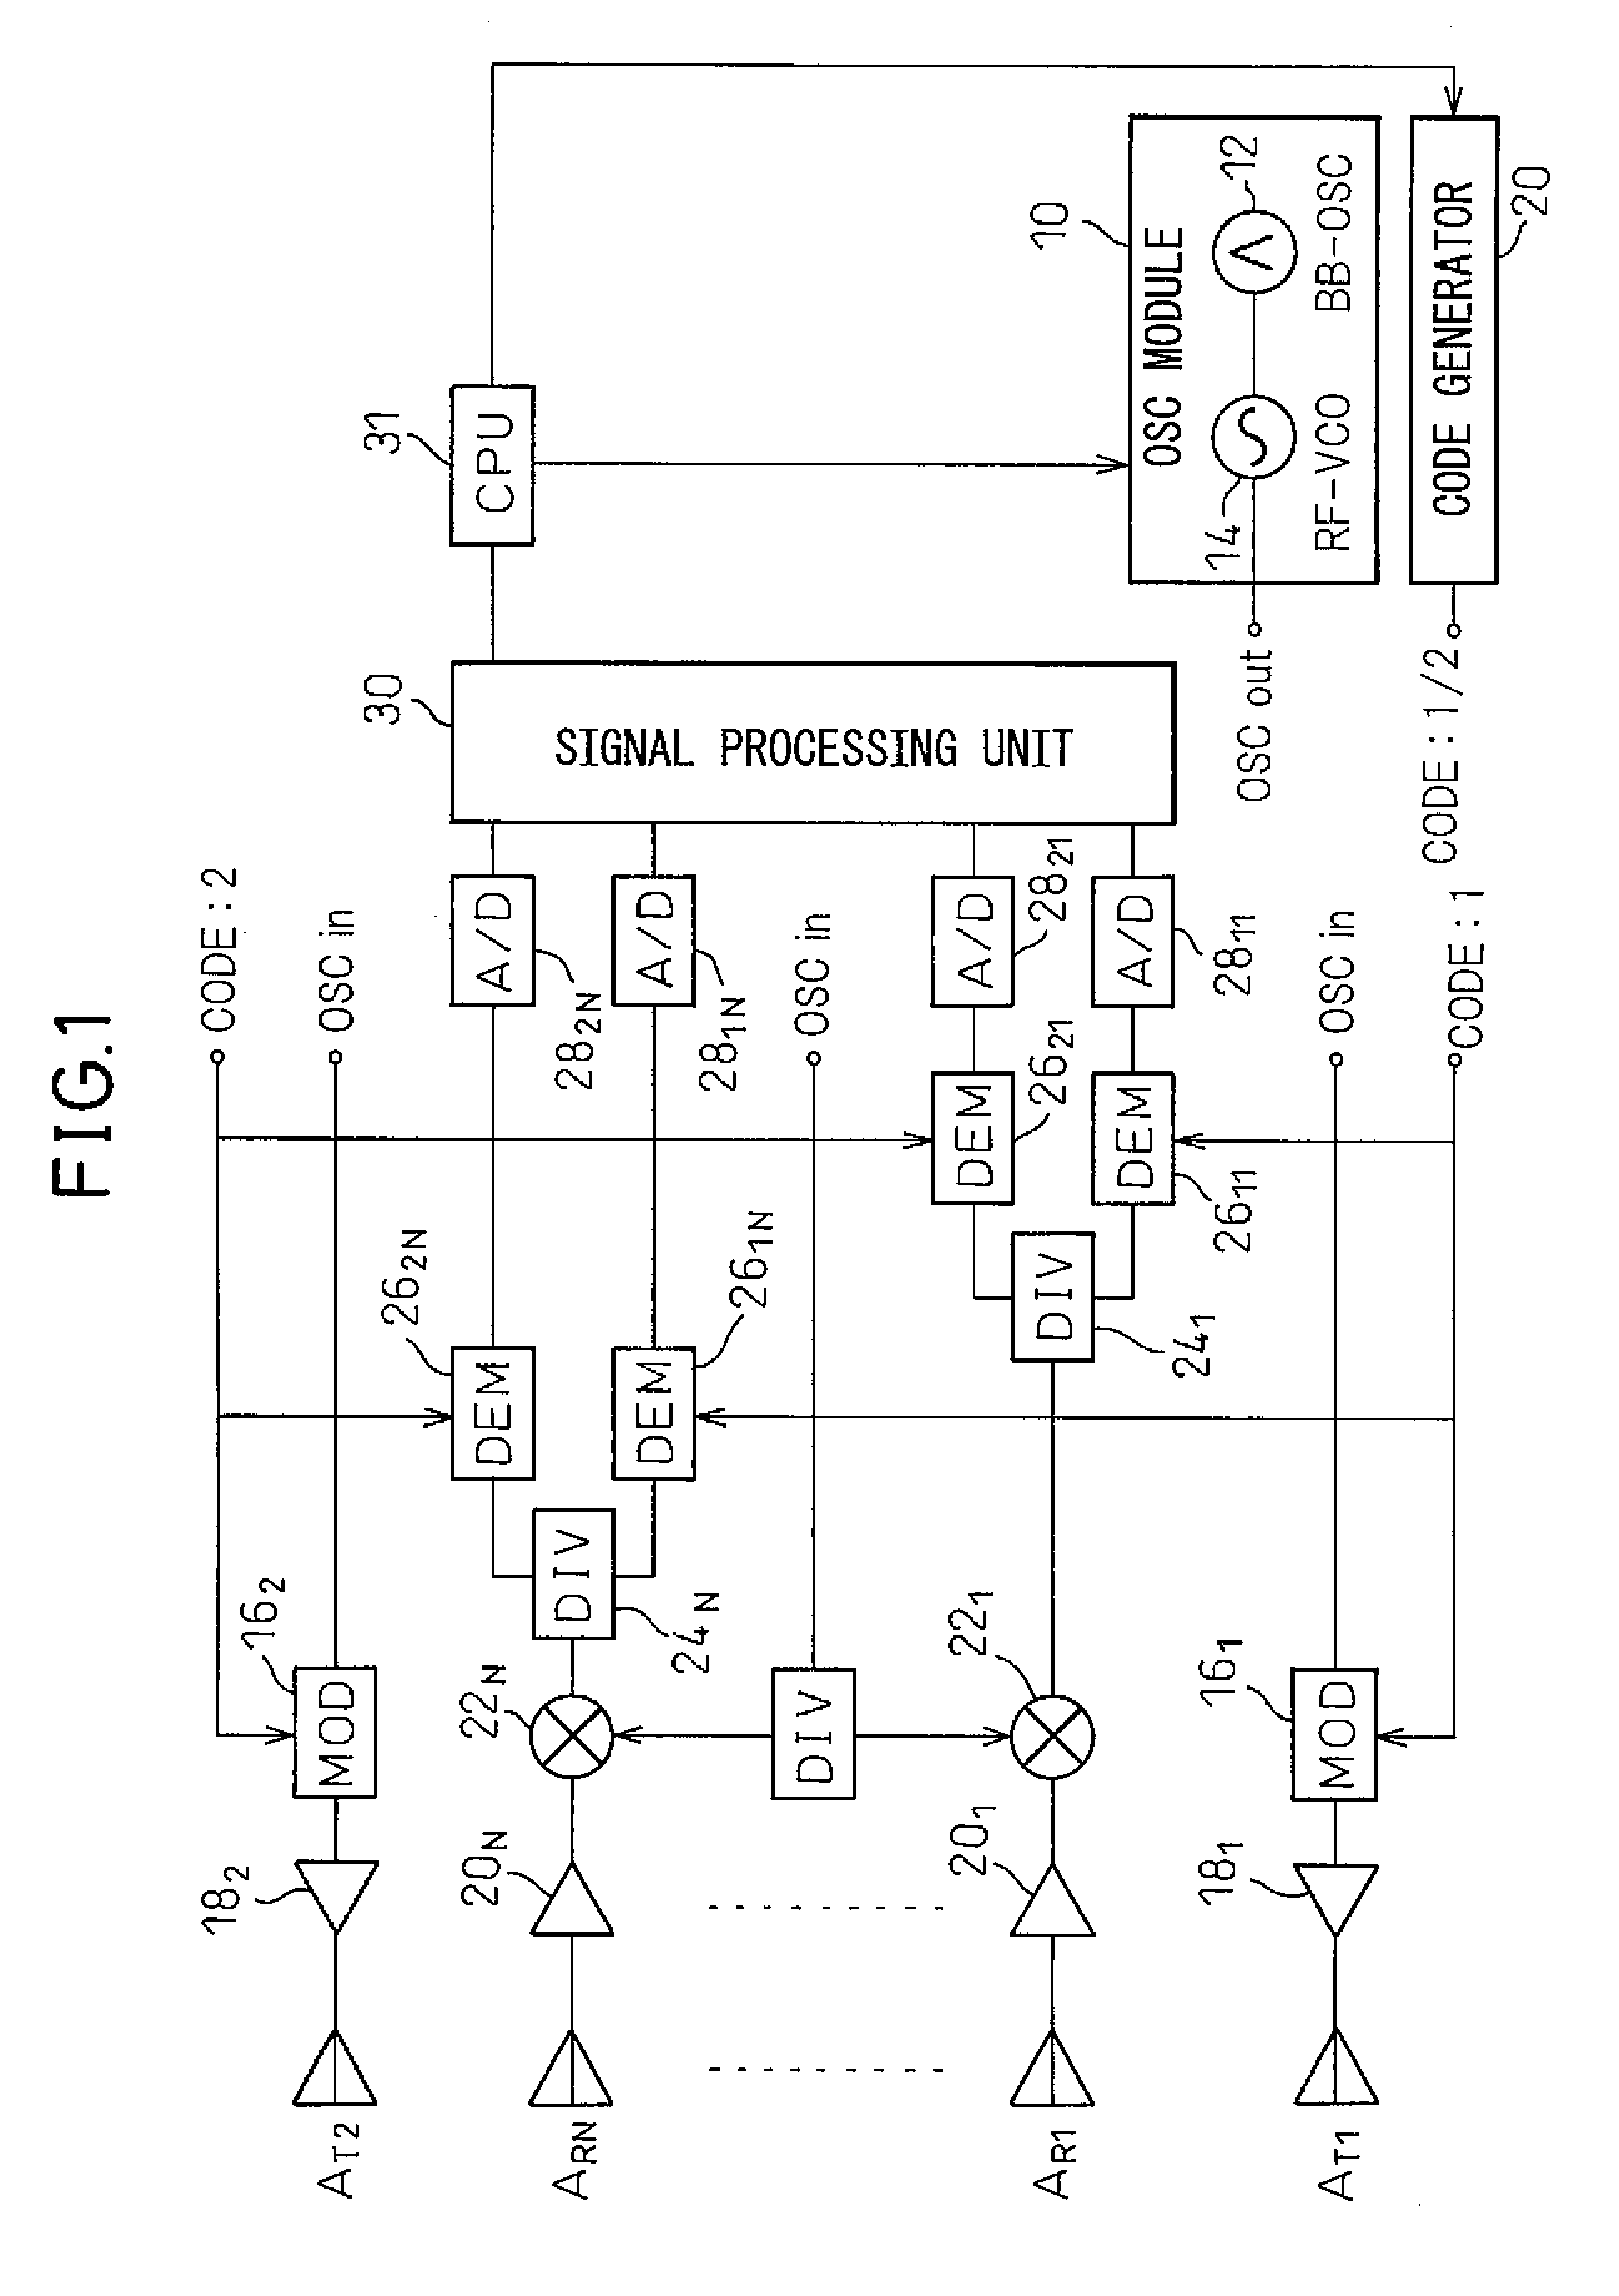 Detection and ranging appartus and detection and ranging method